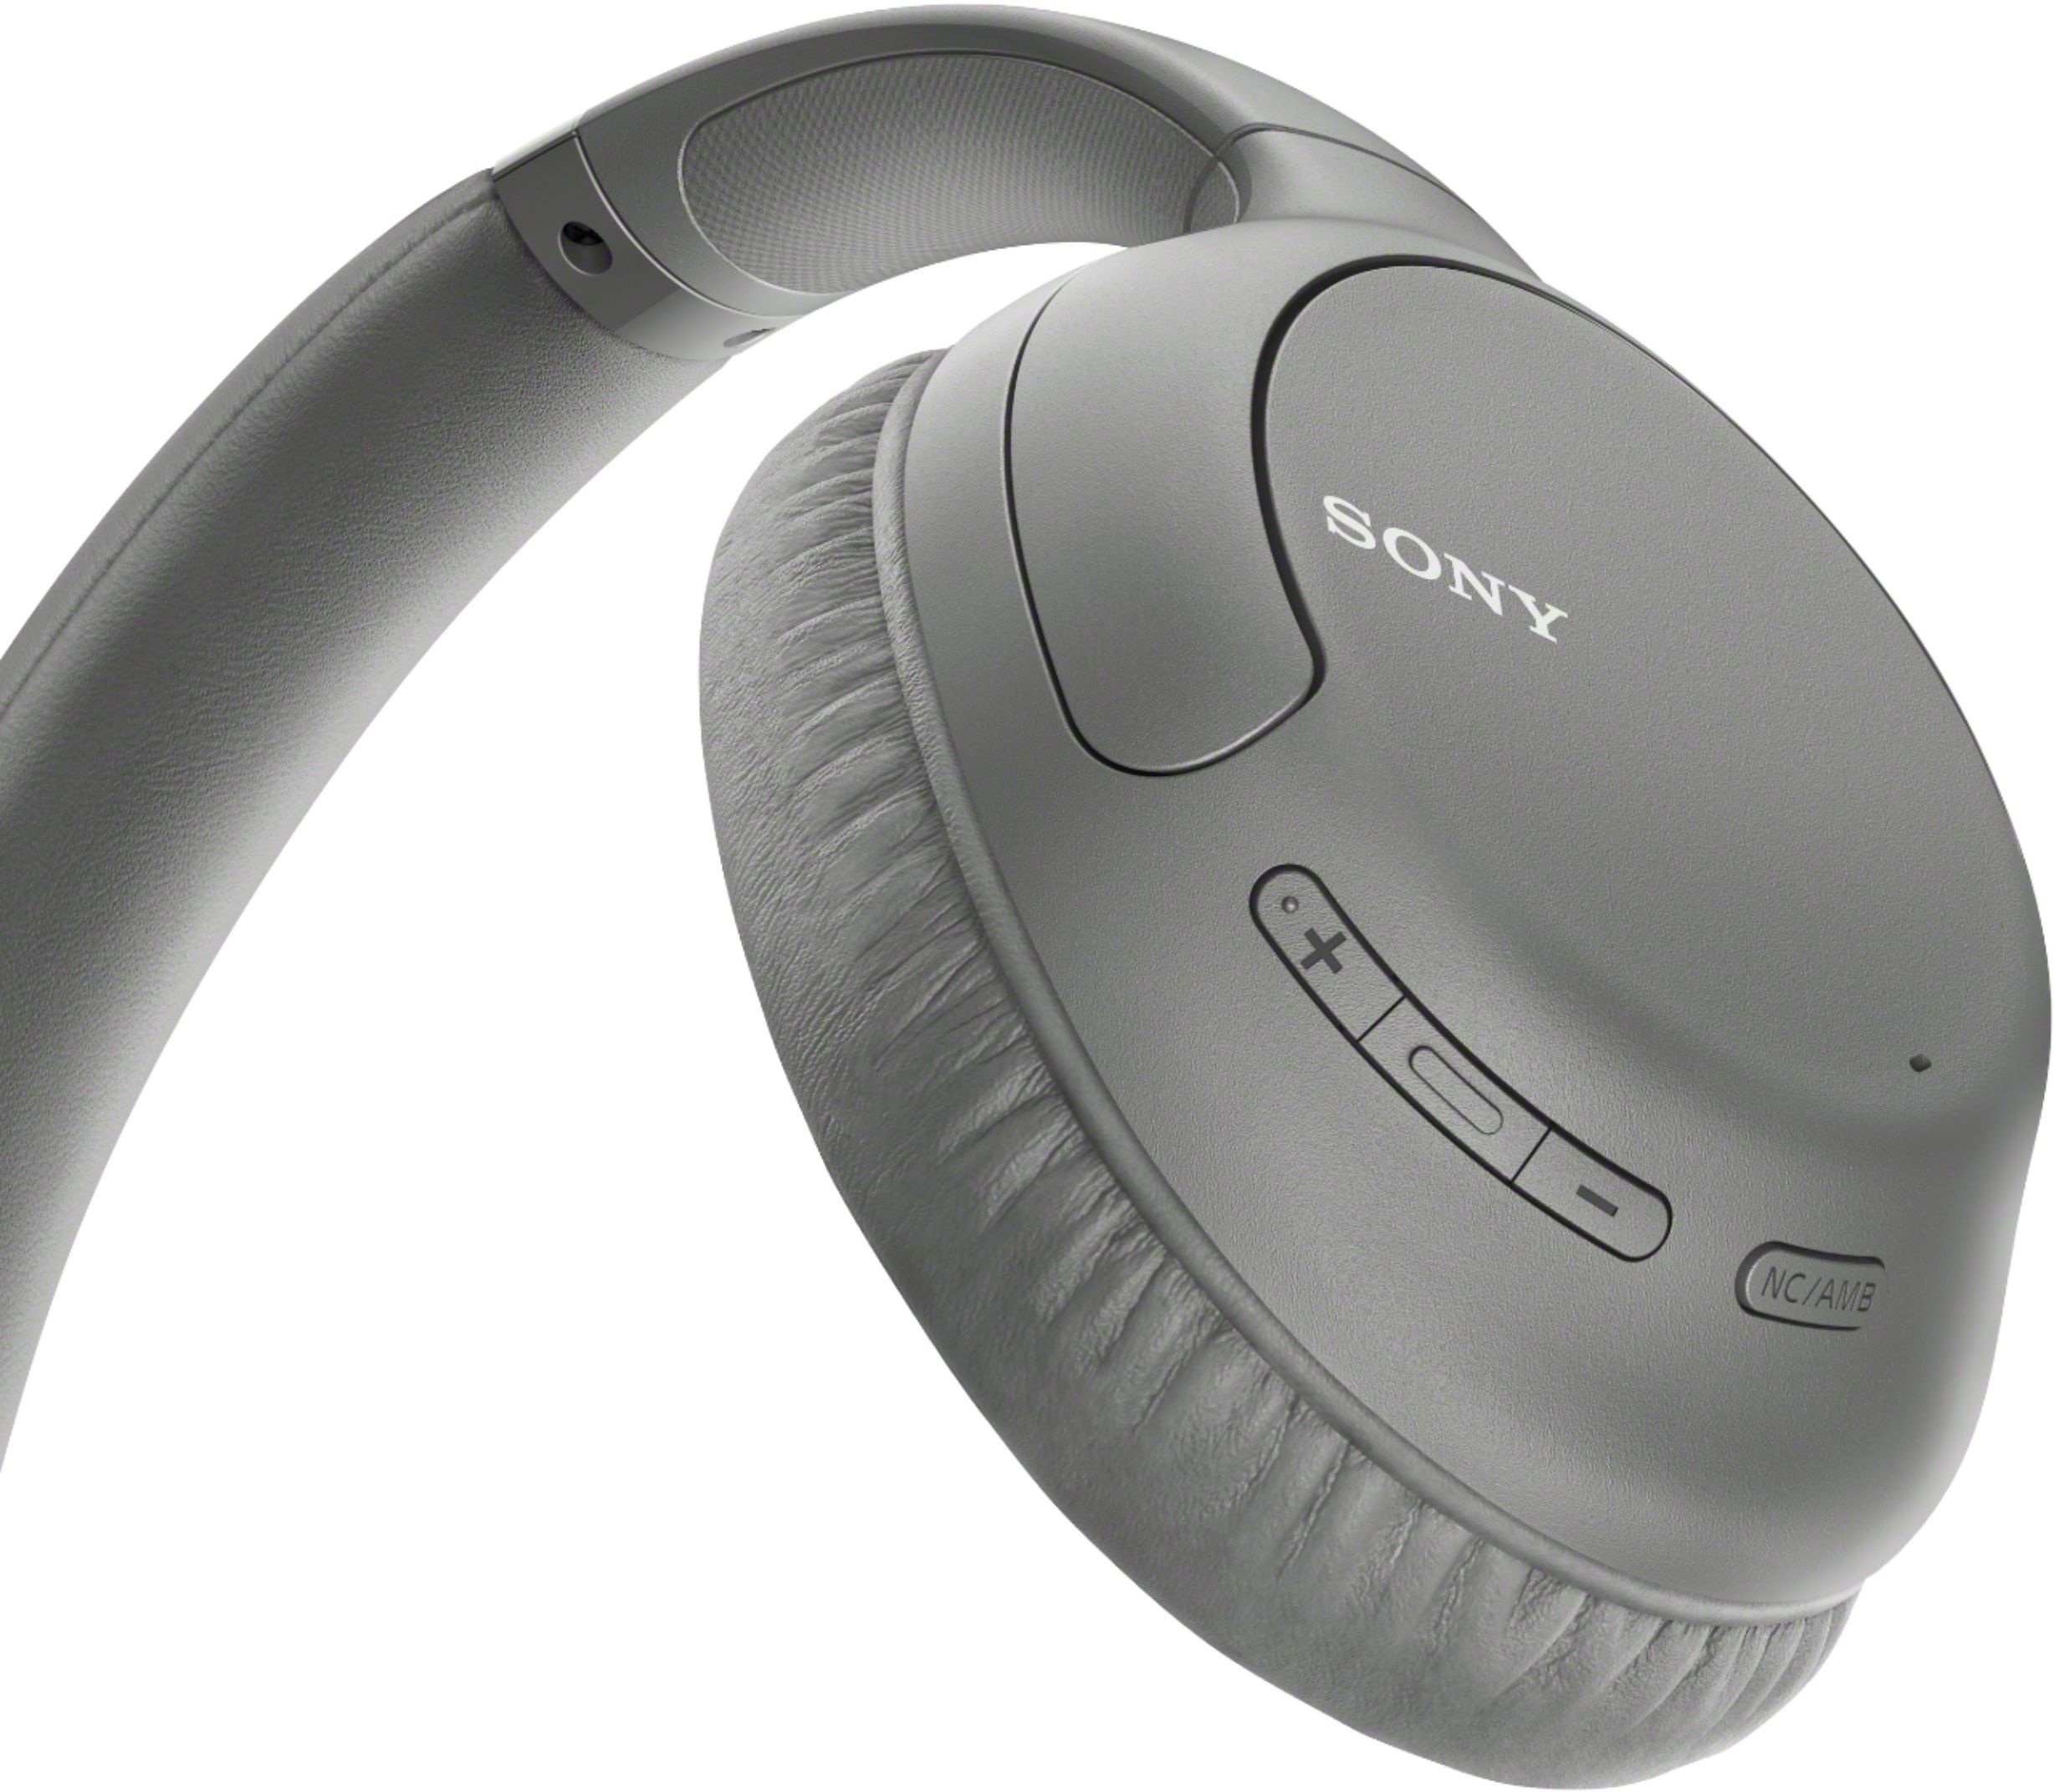 Sony WHCH710NLCE7 Wireless Over Ear Noise Cancelling Headphones - Blue